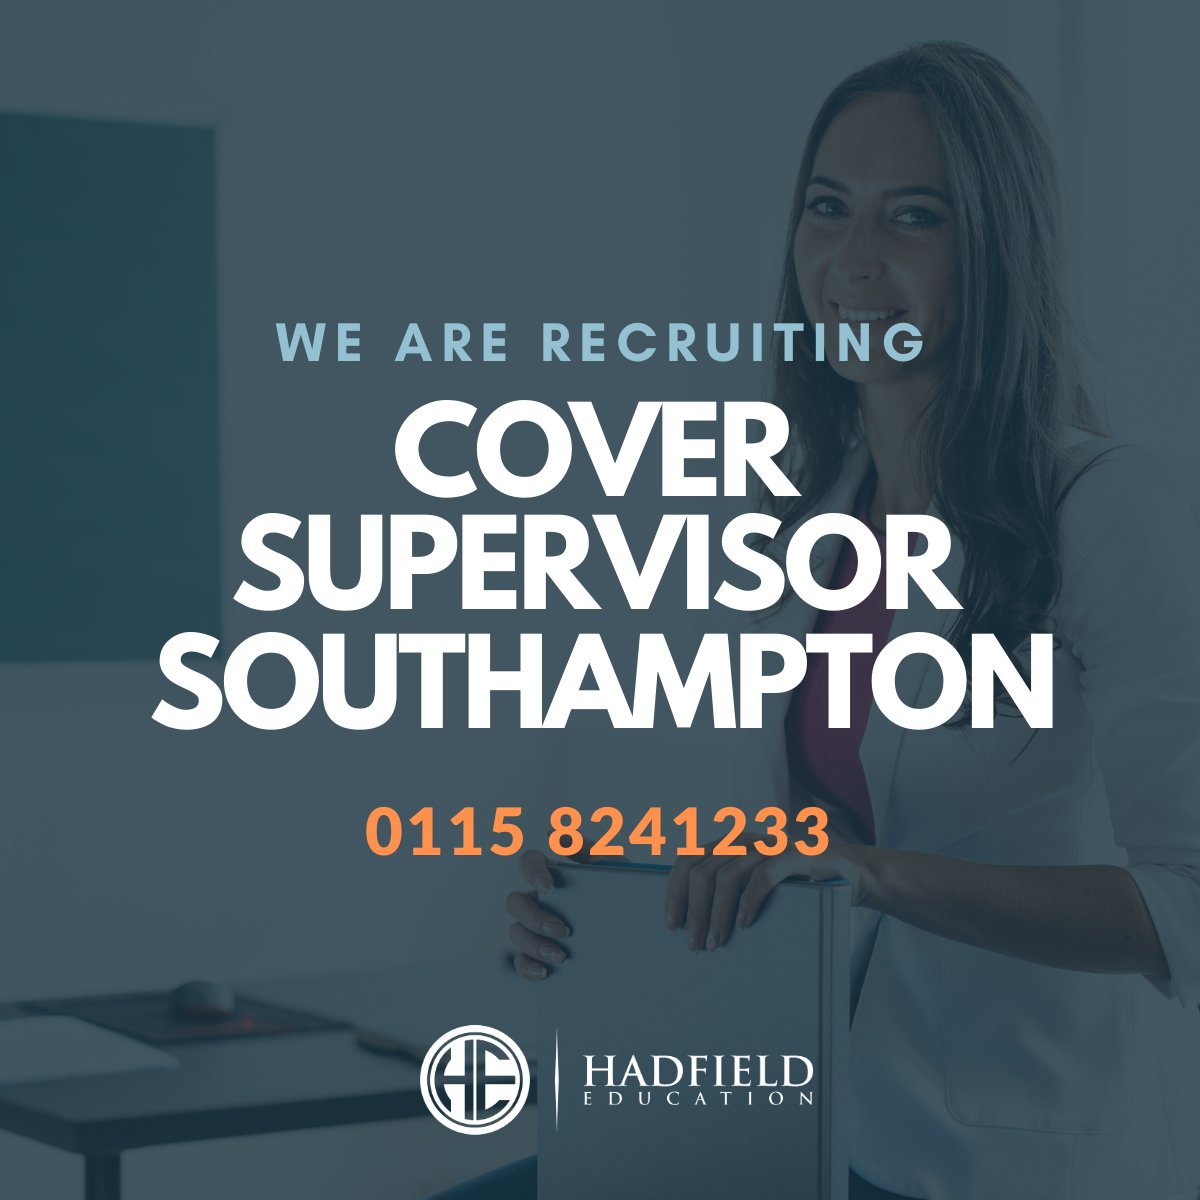 🌟 We're hiring! 🌟 Join our team as a Cover Supervisor in 📍Southampton 🎓 Apply now and make a difference! 💼 #SouthamptonJobs #TeachingJobs #CoverSupervisorJobs 🚀 bit.ly/3OS5WYX